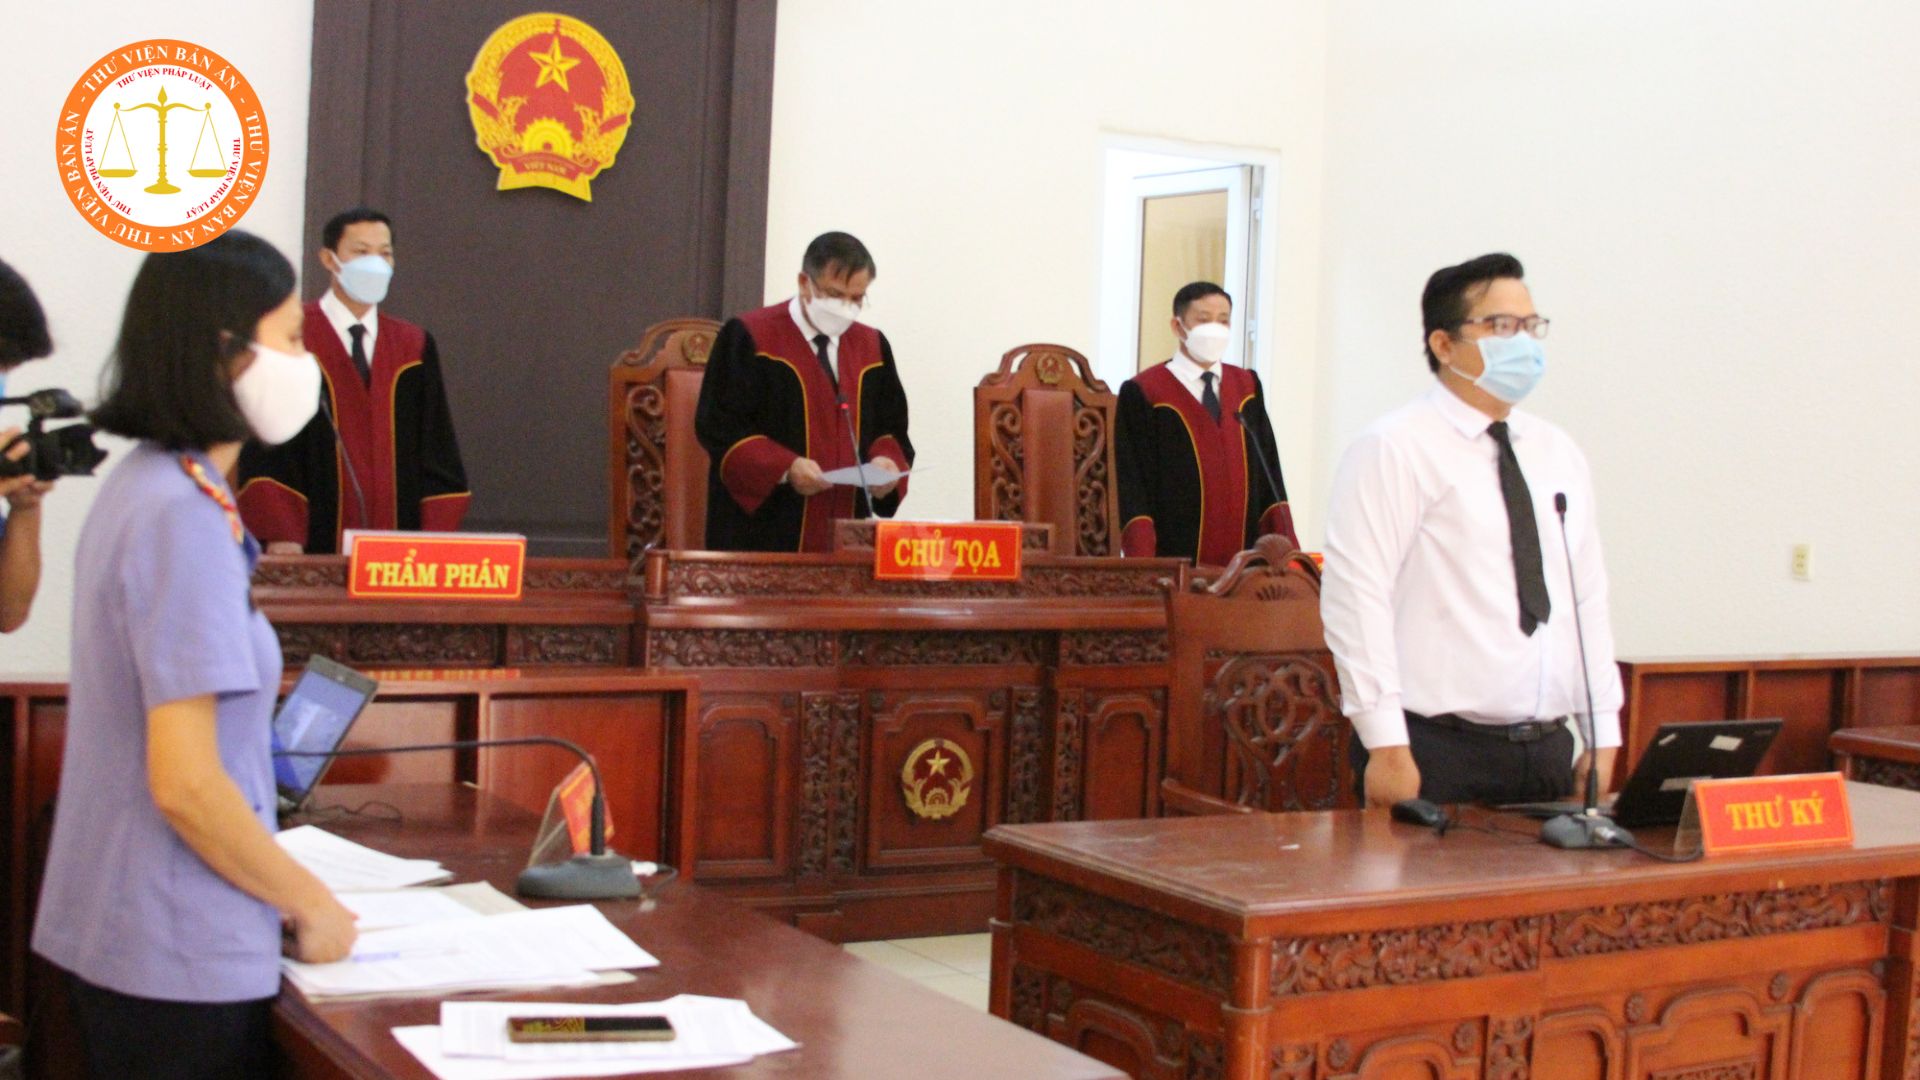 What are the penalties for disrupting the court in Vietnam?